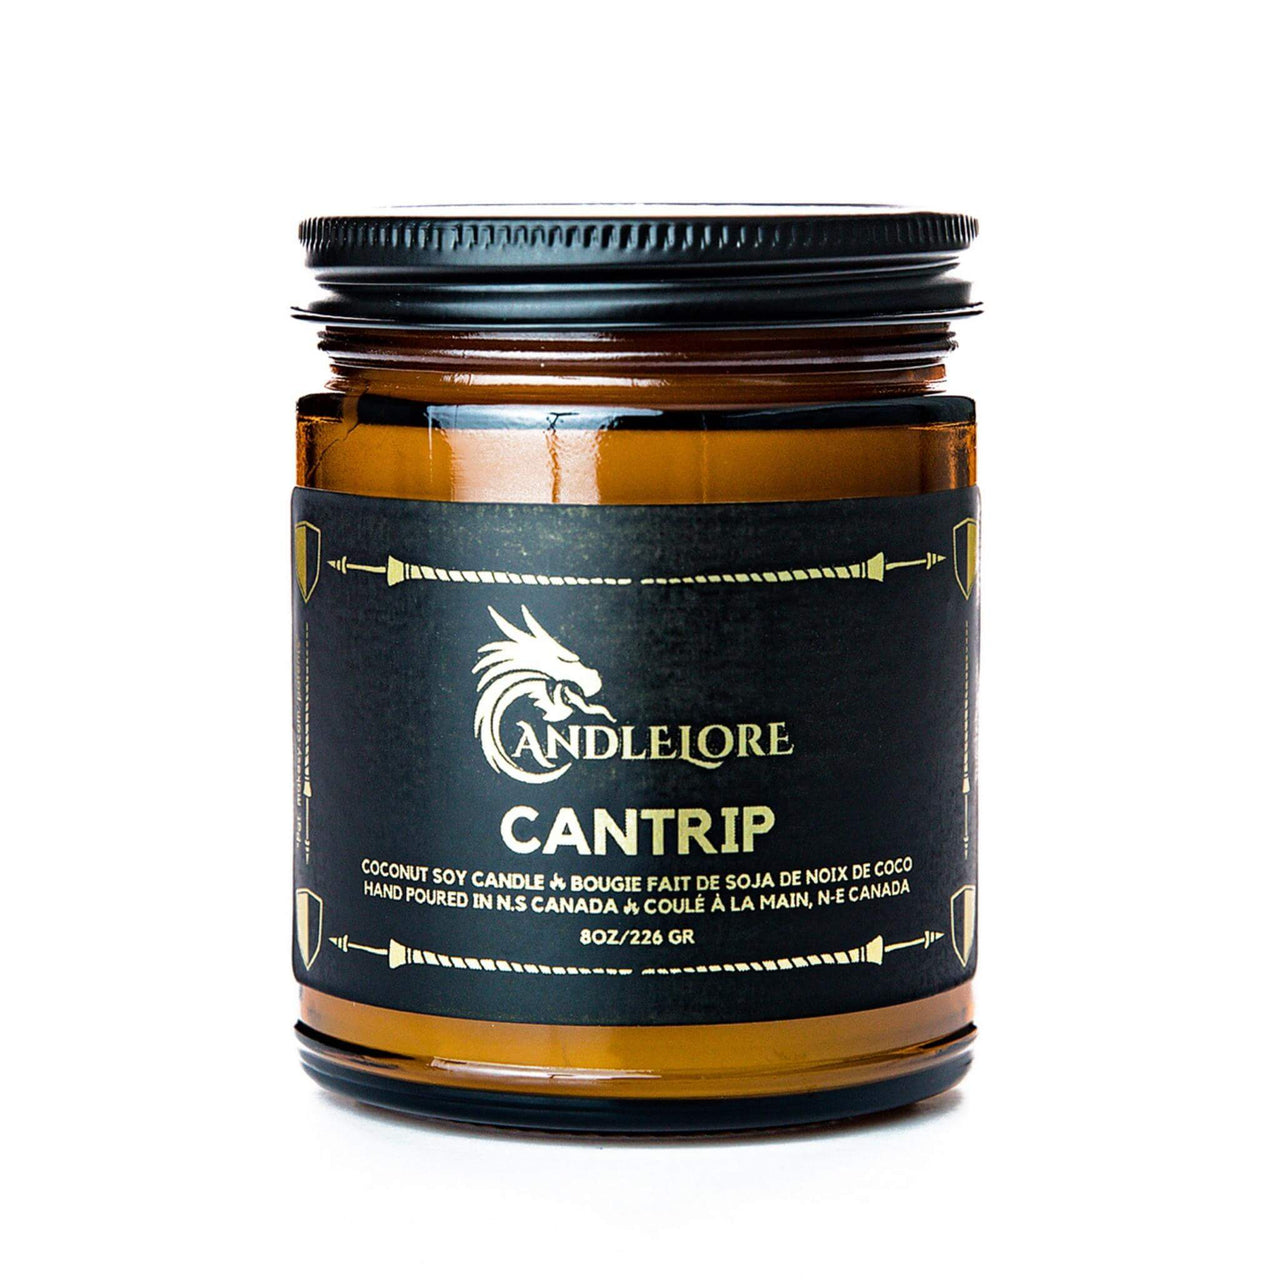 Medium Cantrip scented candle on a white background